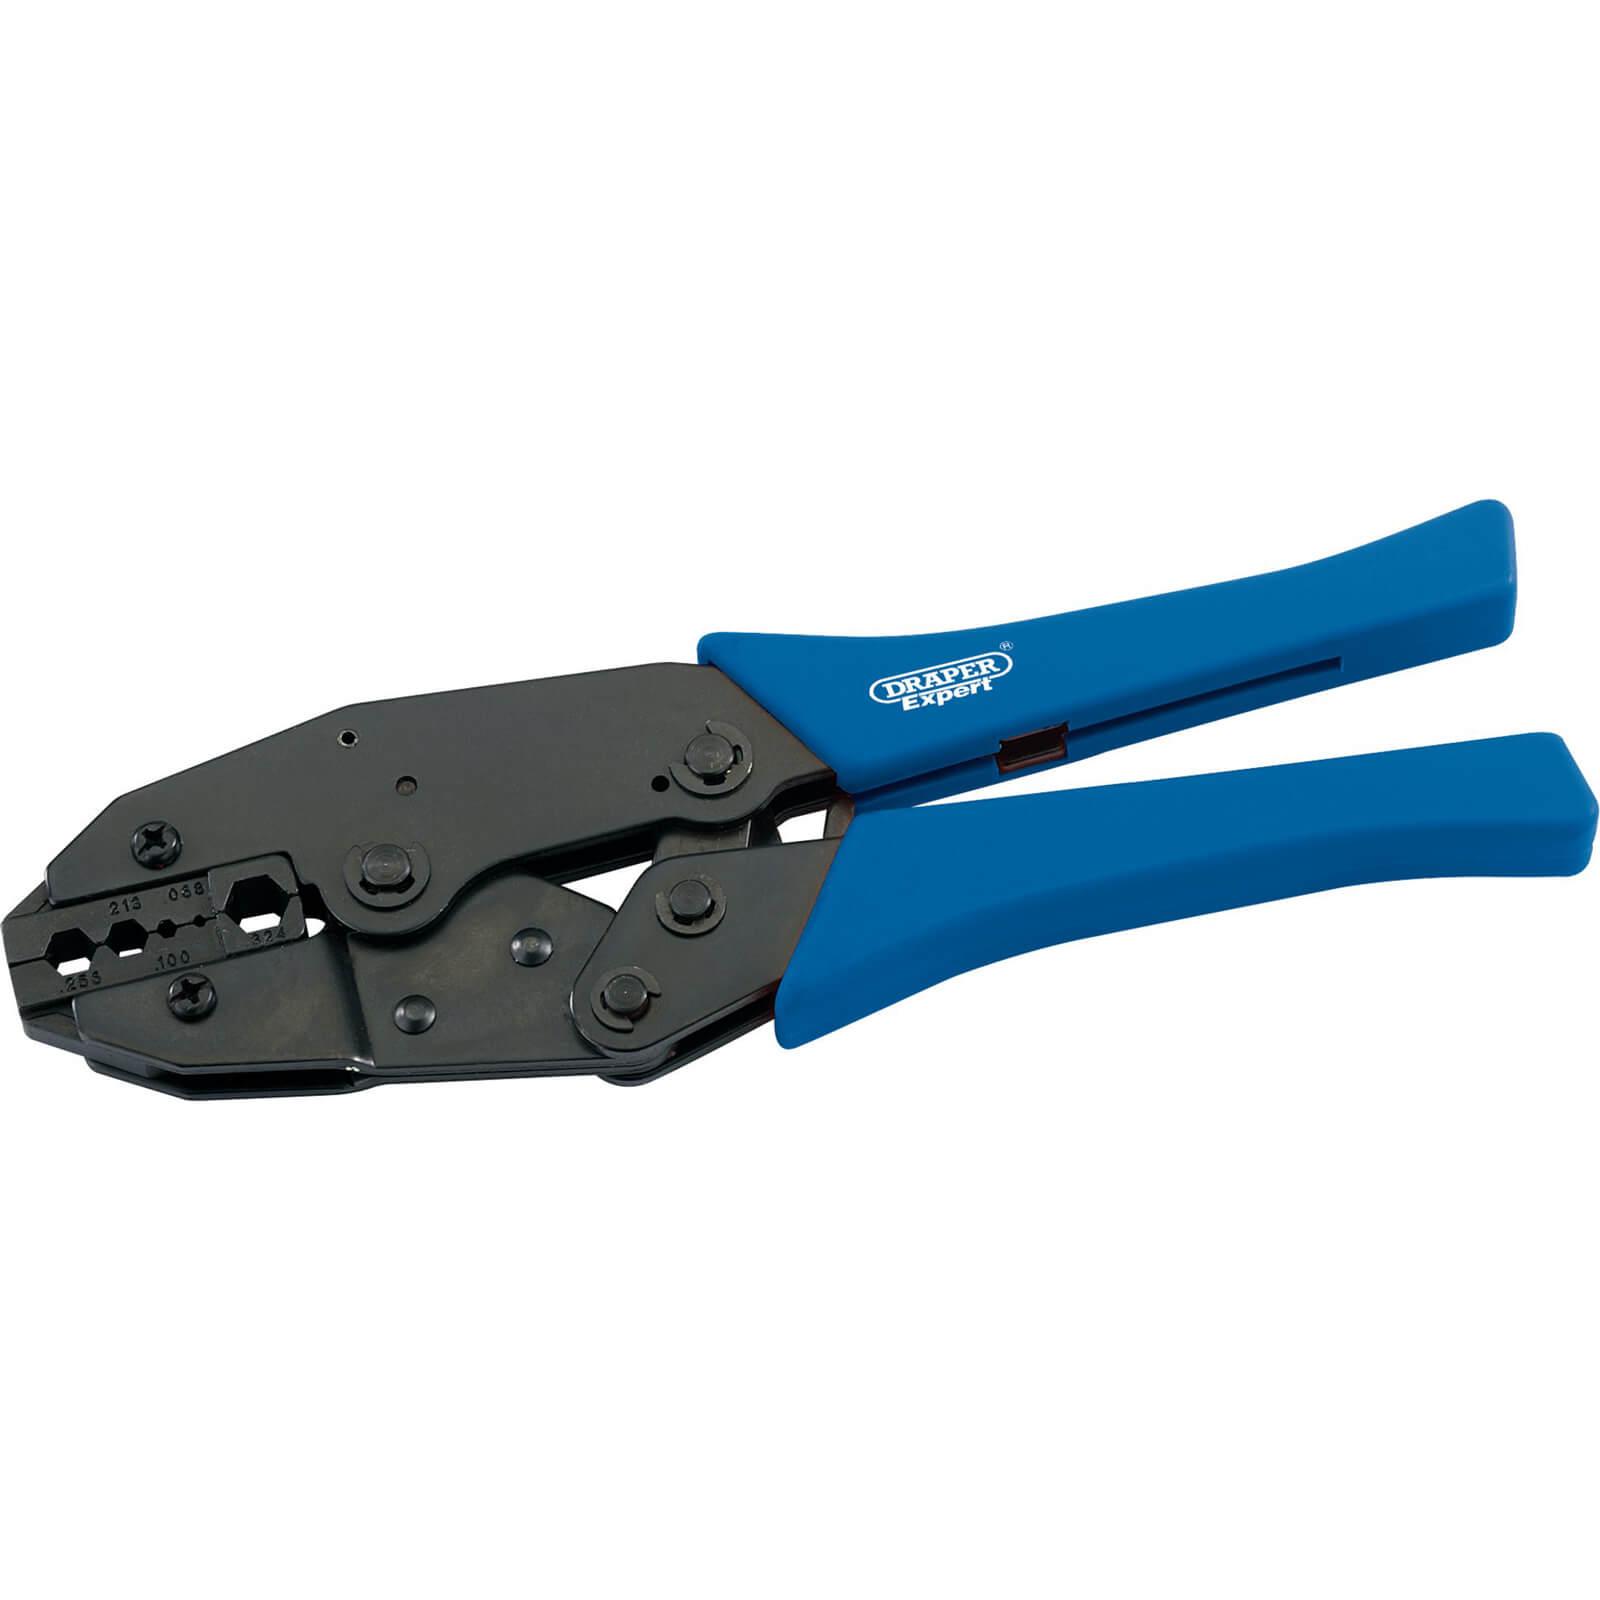 Photos - Pliers / Wire Cutters Draper Expert Coaxial Series Crimping Tool CT-HEX 